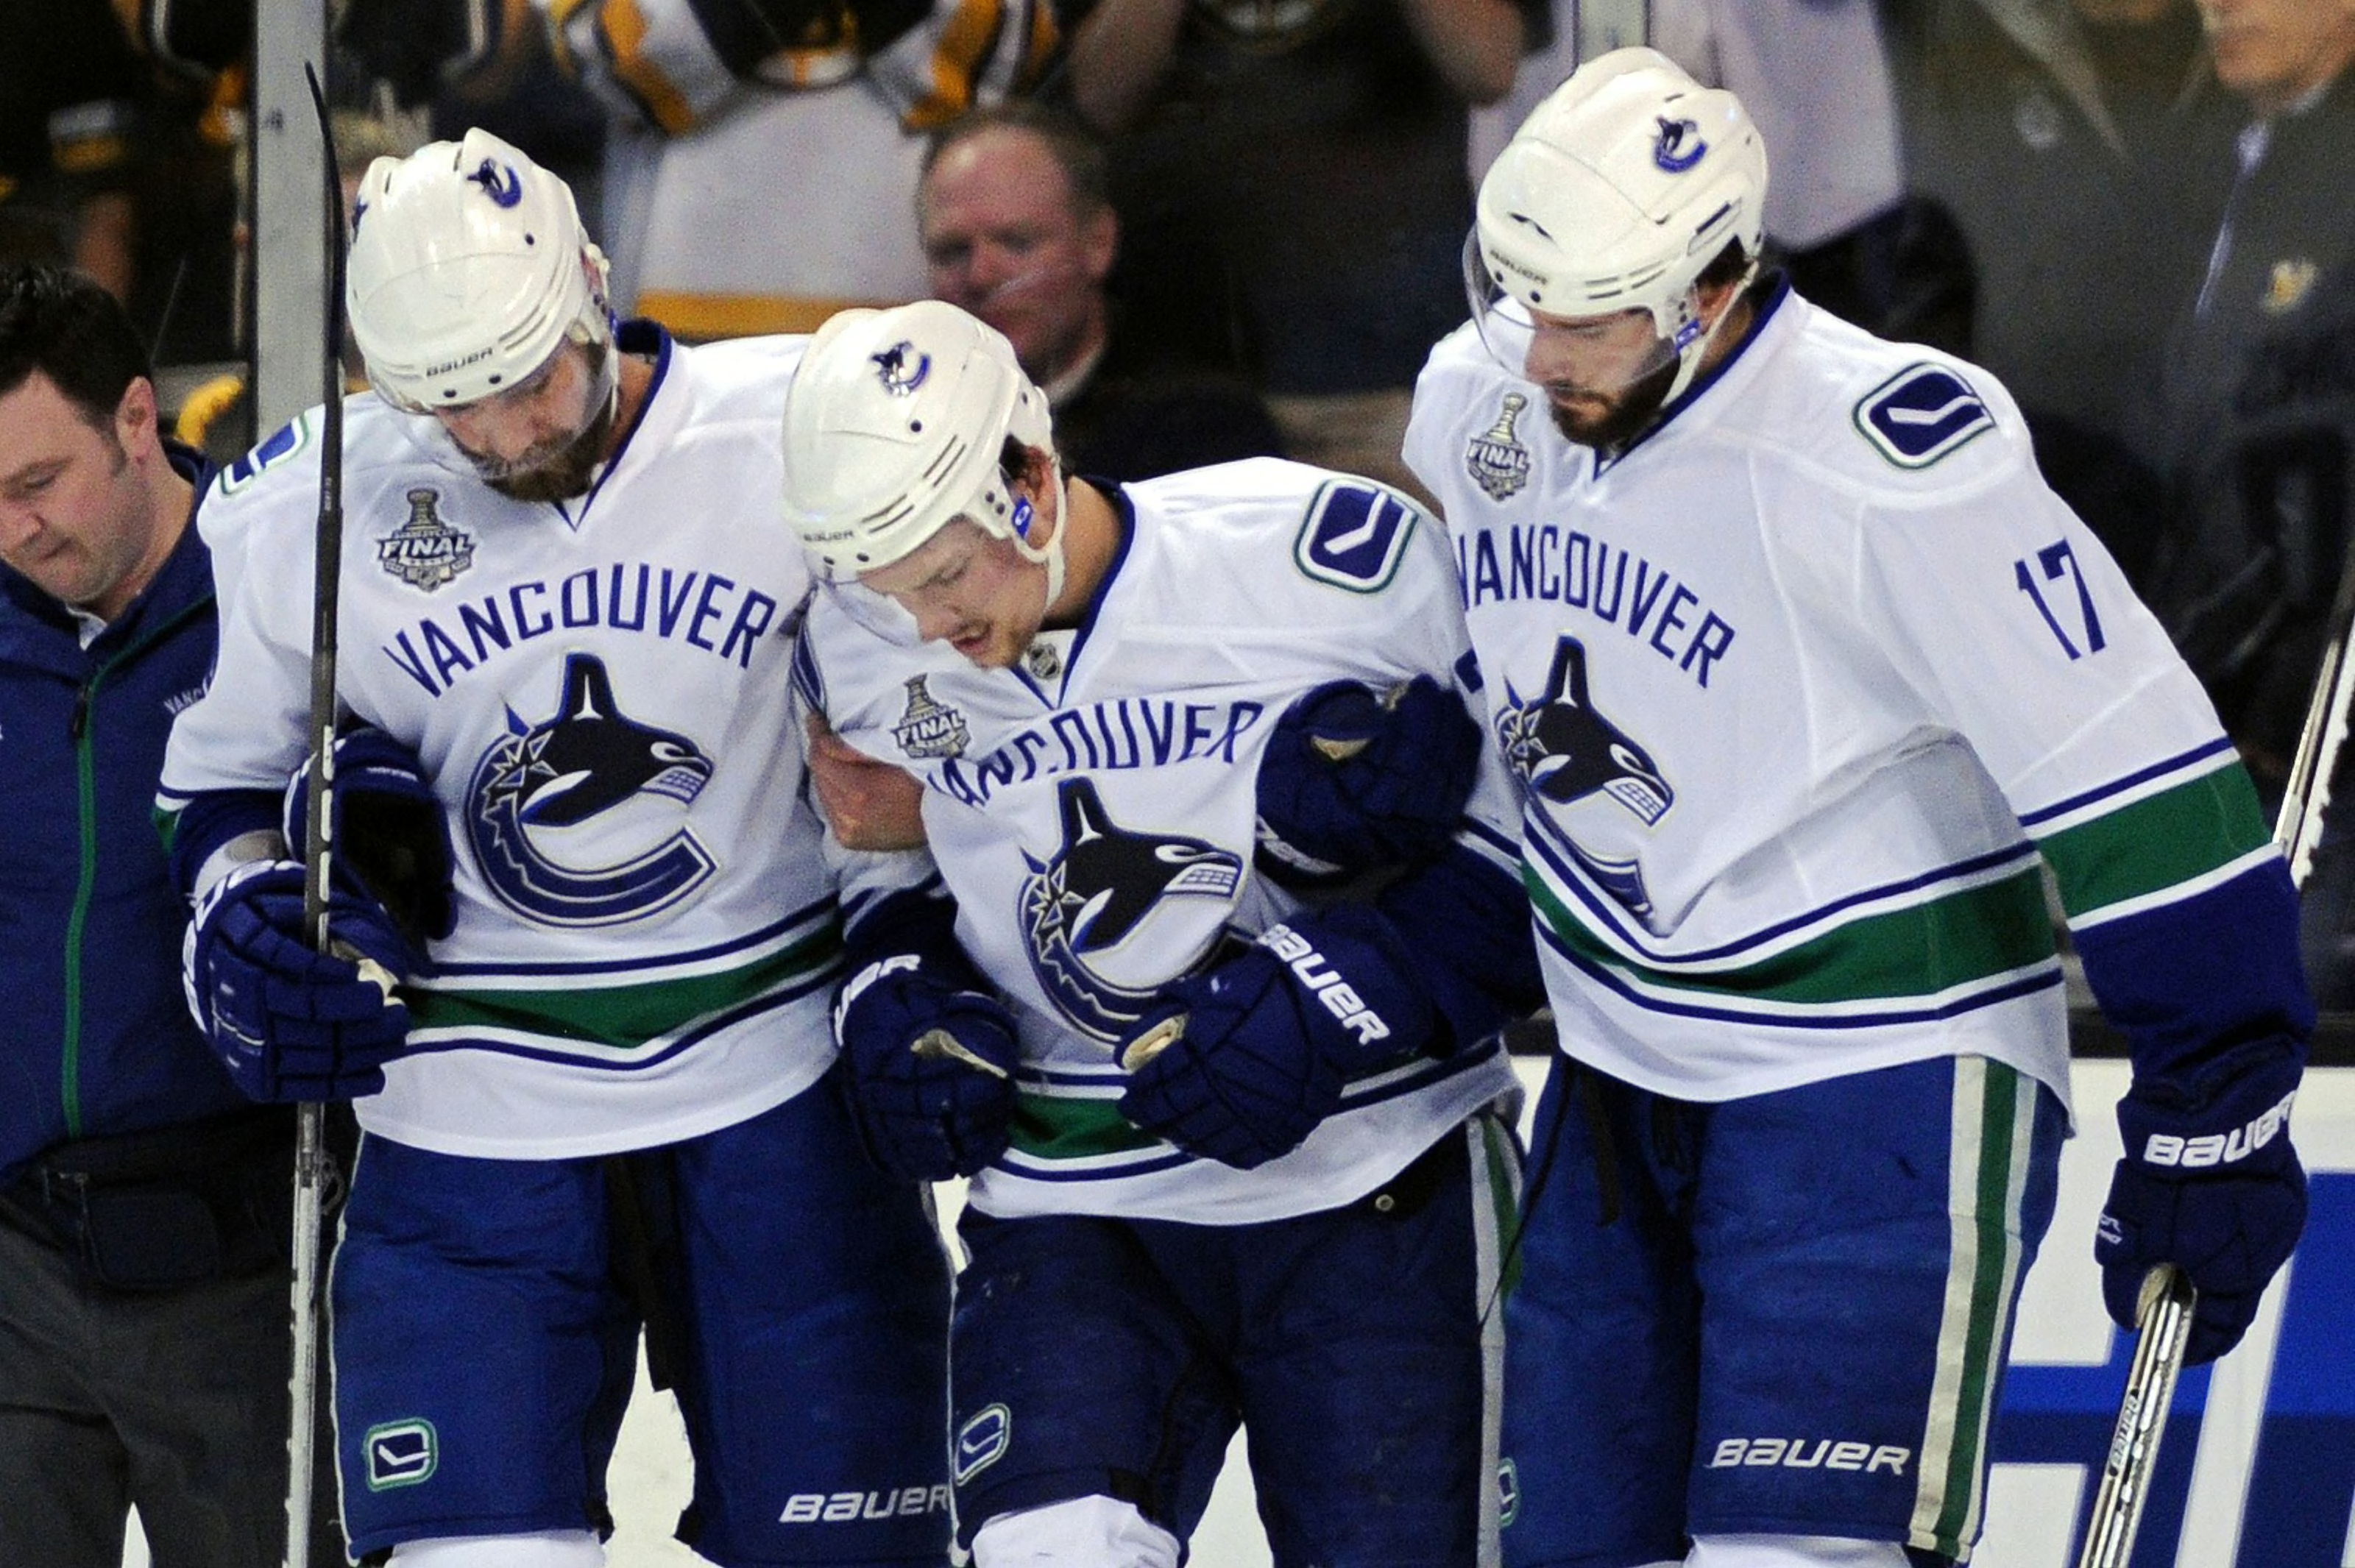 Canucks: 10 year anniversary of 2011 Stanley Cup Final